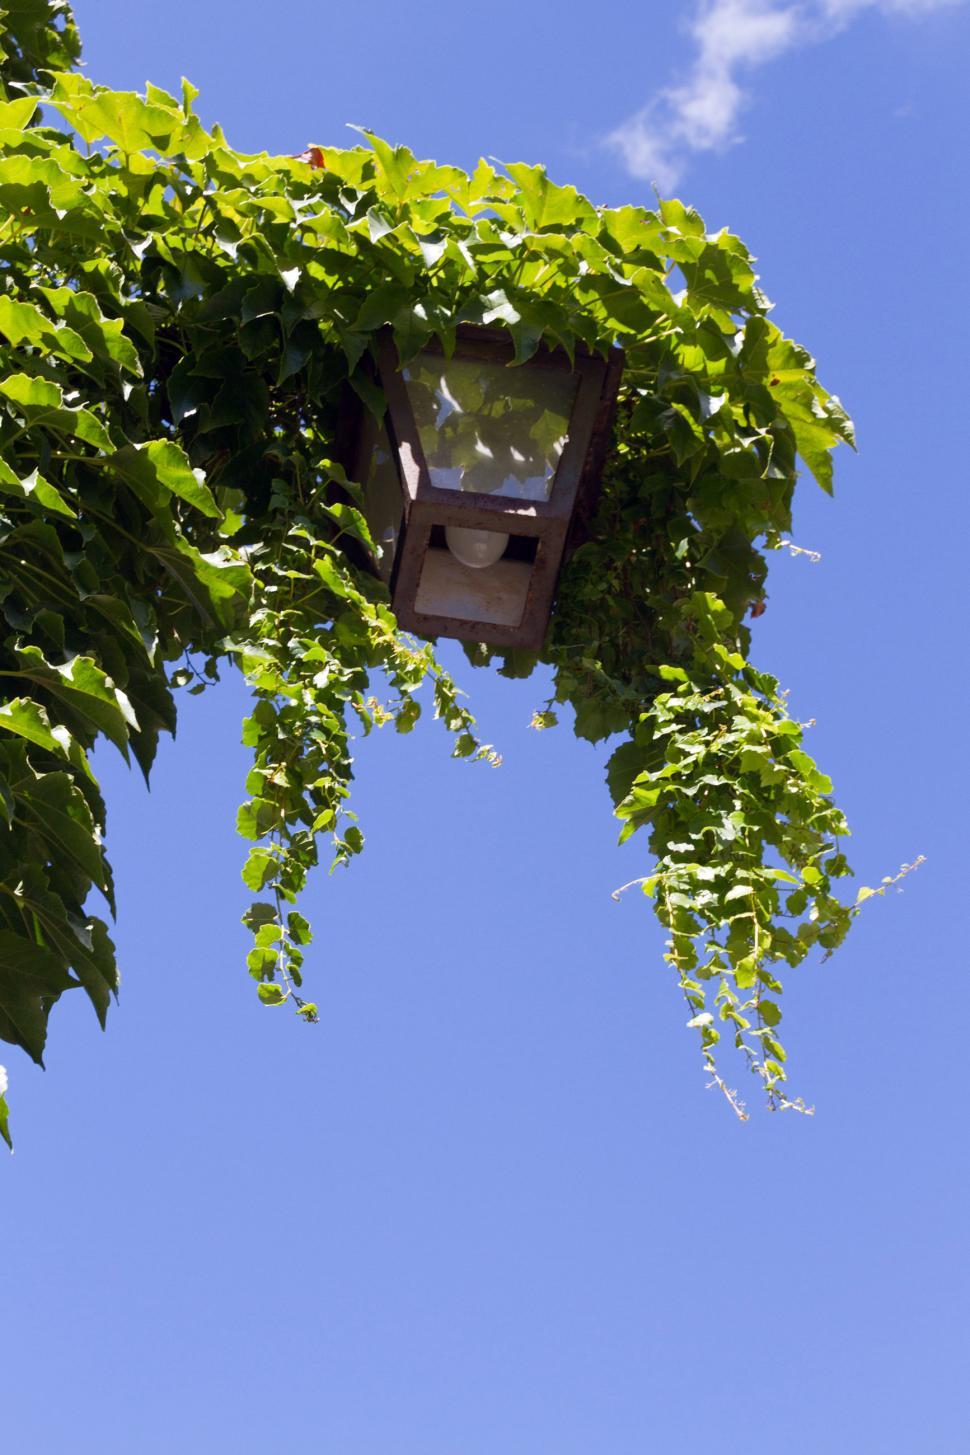 Free Image of Street lamp with blue sky 